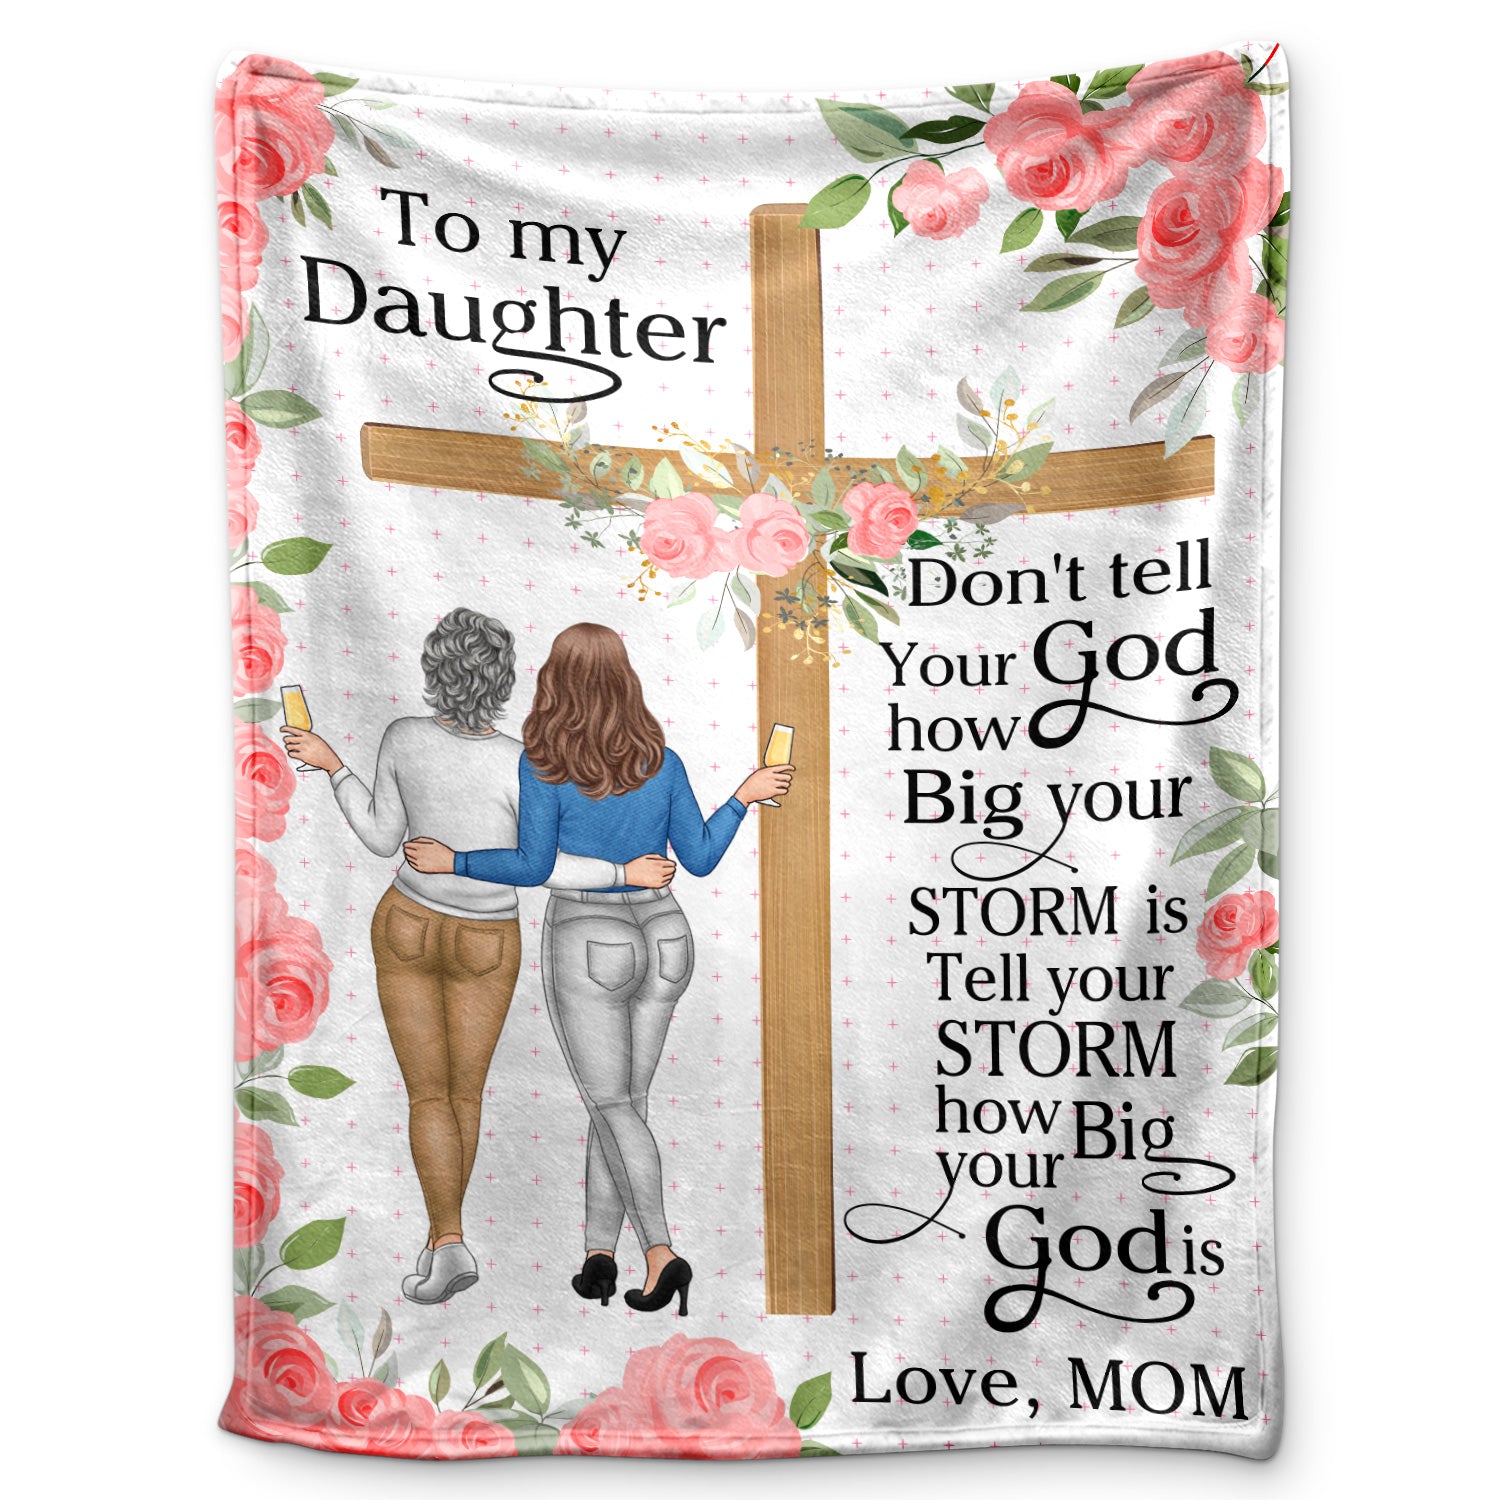 Tell Your Storm - Gift For Daughter - Personalized Fleece Blanket, Sherpa Blanket